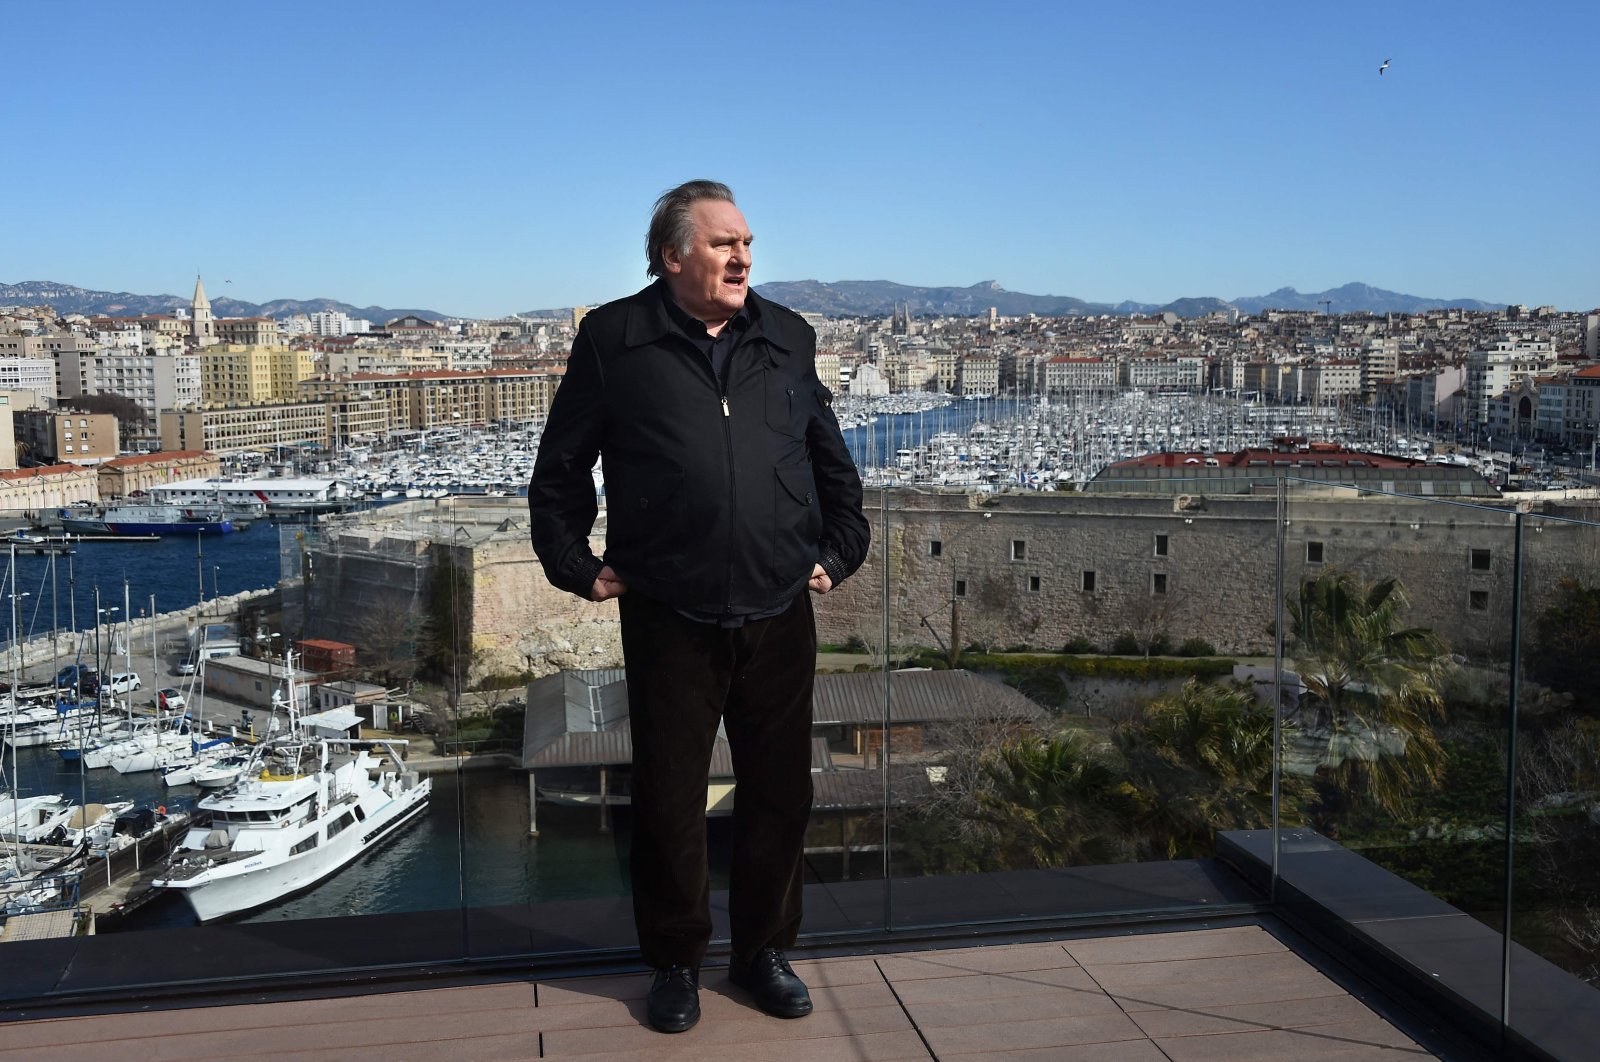 French actor Gerard Depardieu poses during a photoshoot for the second season of the French TV show "Marseille" broadcasted and co-produced by Netflix, Marseille, southern France, March 18, 2018. (AFP Photo)